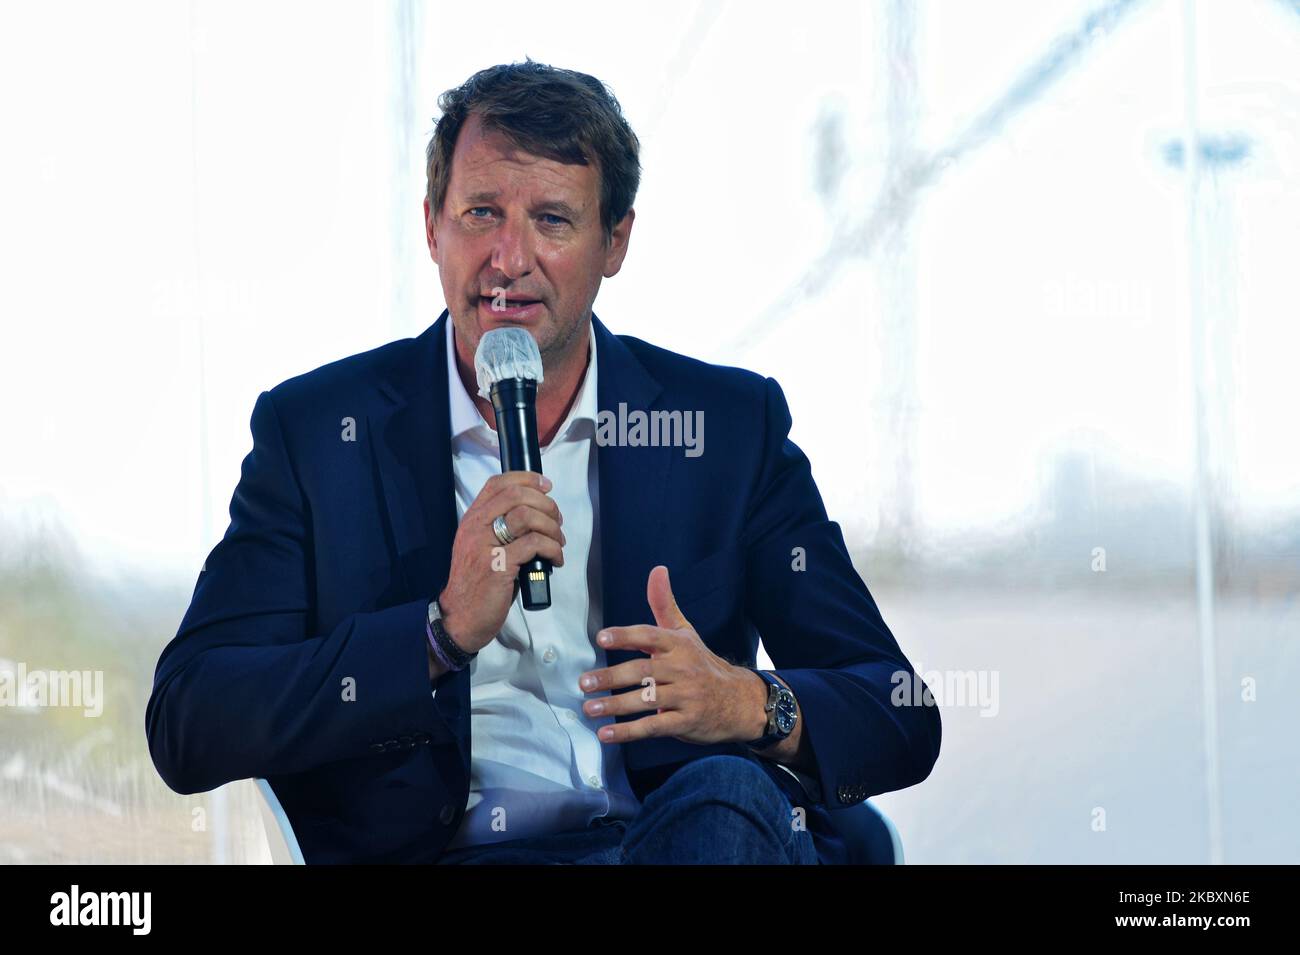 EU deputy Yannick Jadot EELV attends at the meeting of French employers' association Medef themed 'The Renaissance of French Companies' on August 27, 2020, in Paris, France. (Photo by Daniel Pier/NurPhoto) Stock Photo